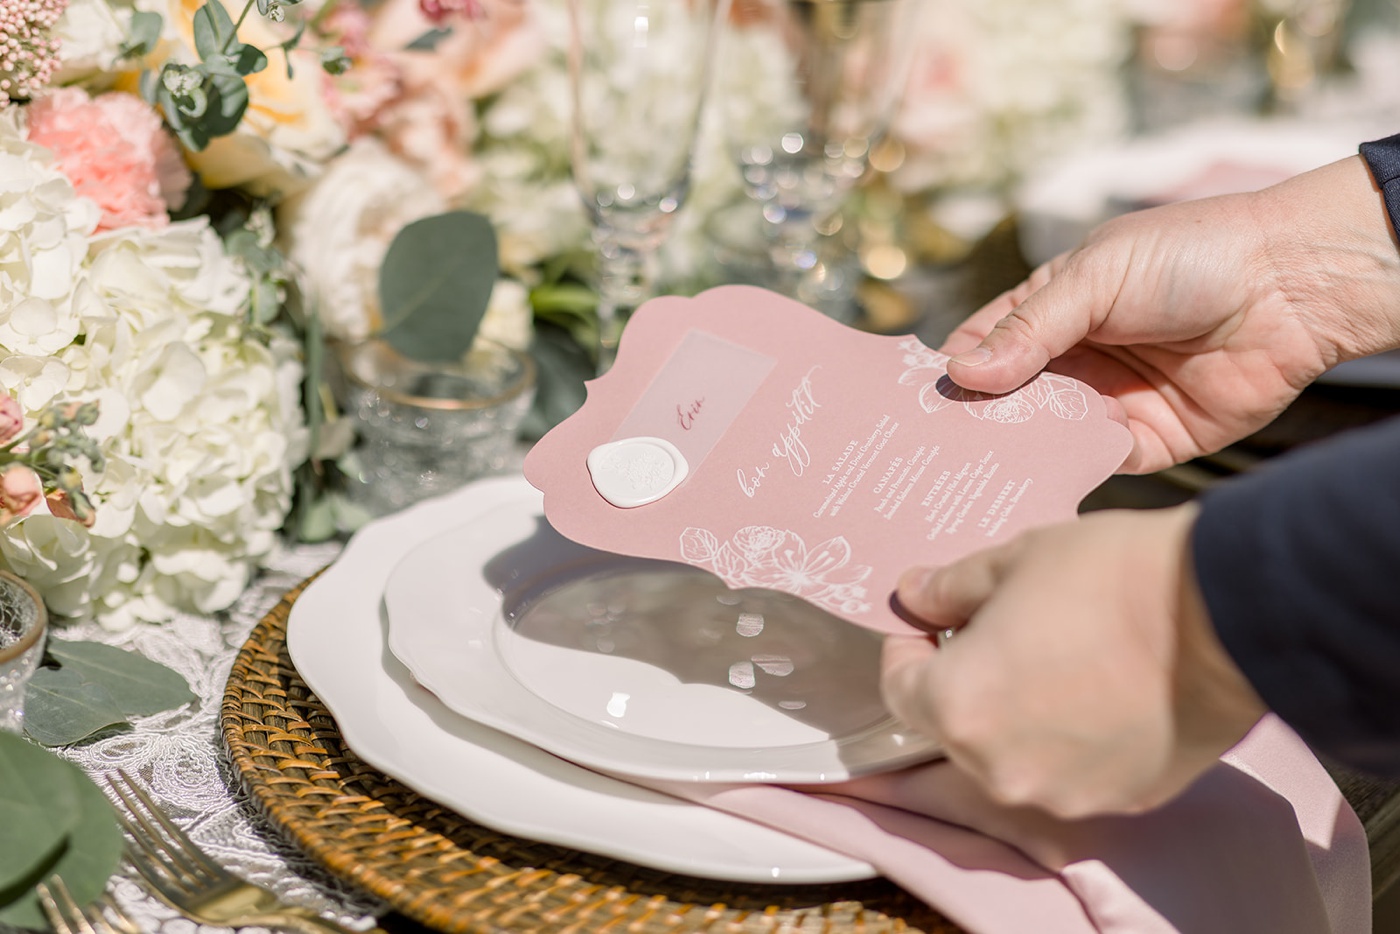 What to look for when choosing a wedding invitation designer